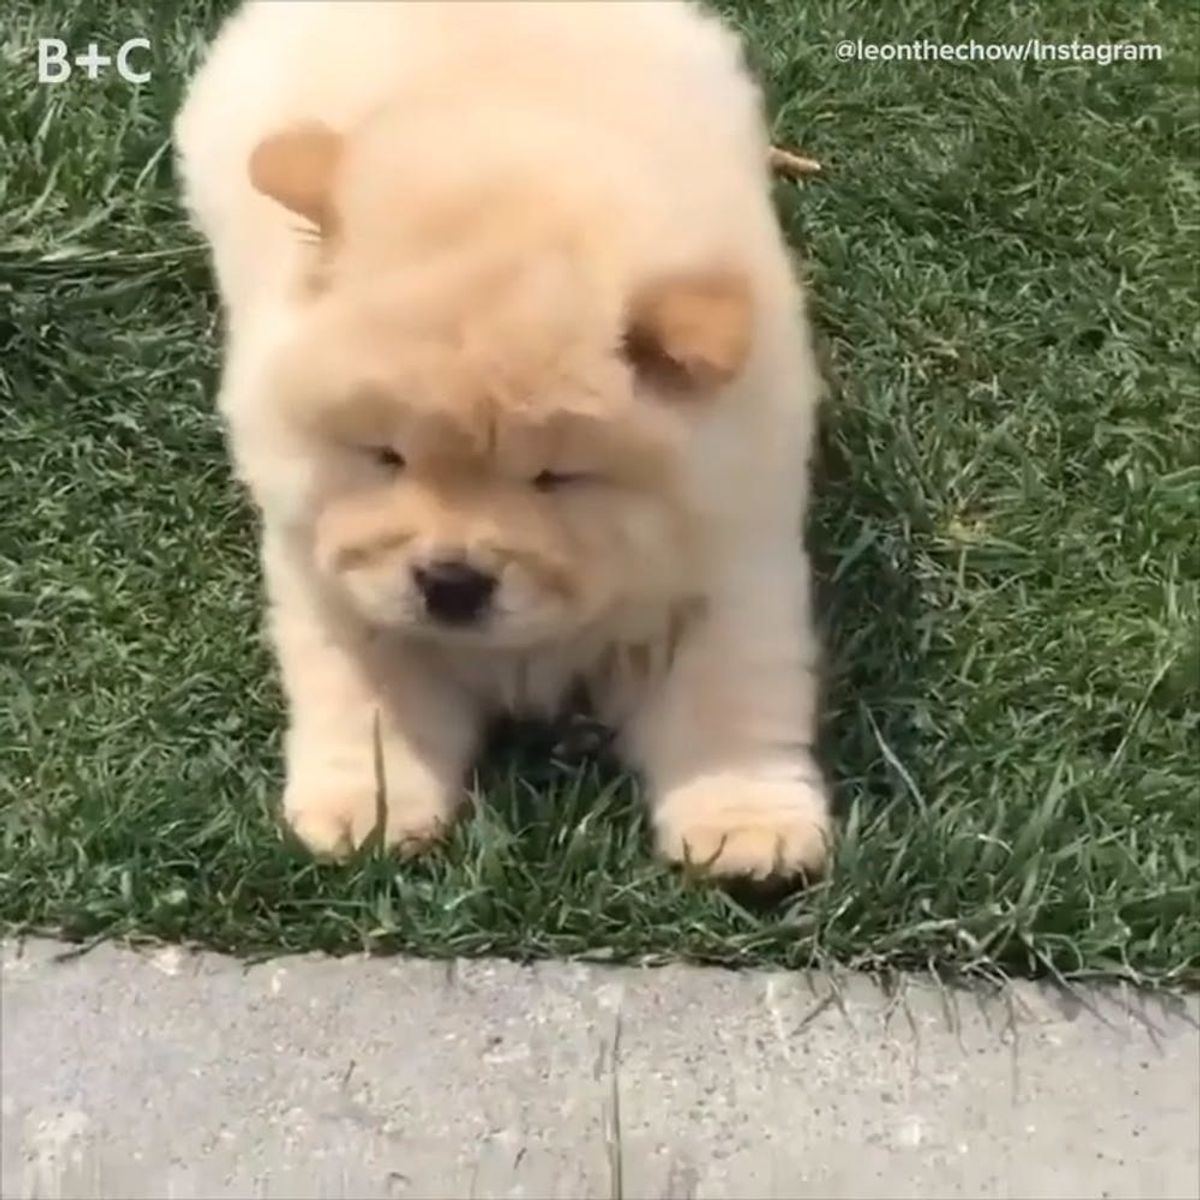 Fluffy Puppies Are Here to Steal Your Heart